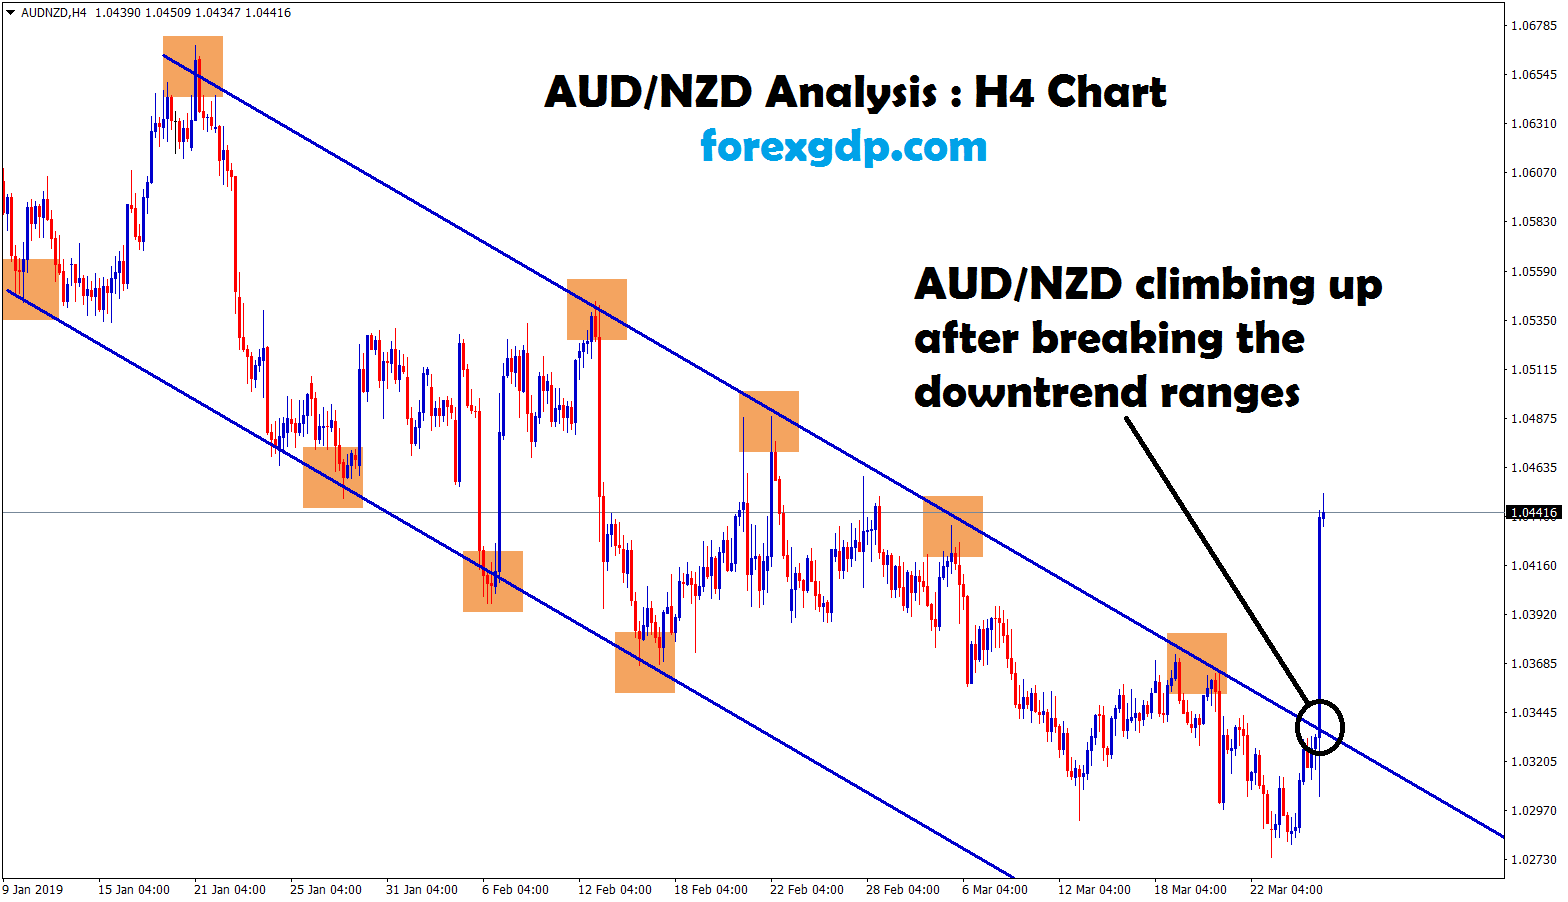 aud nzd broken the downtrend channel and moving up